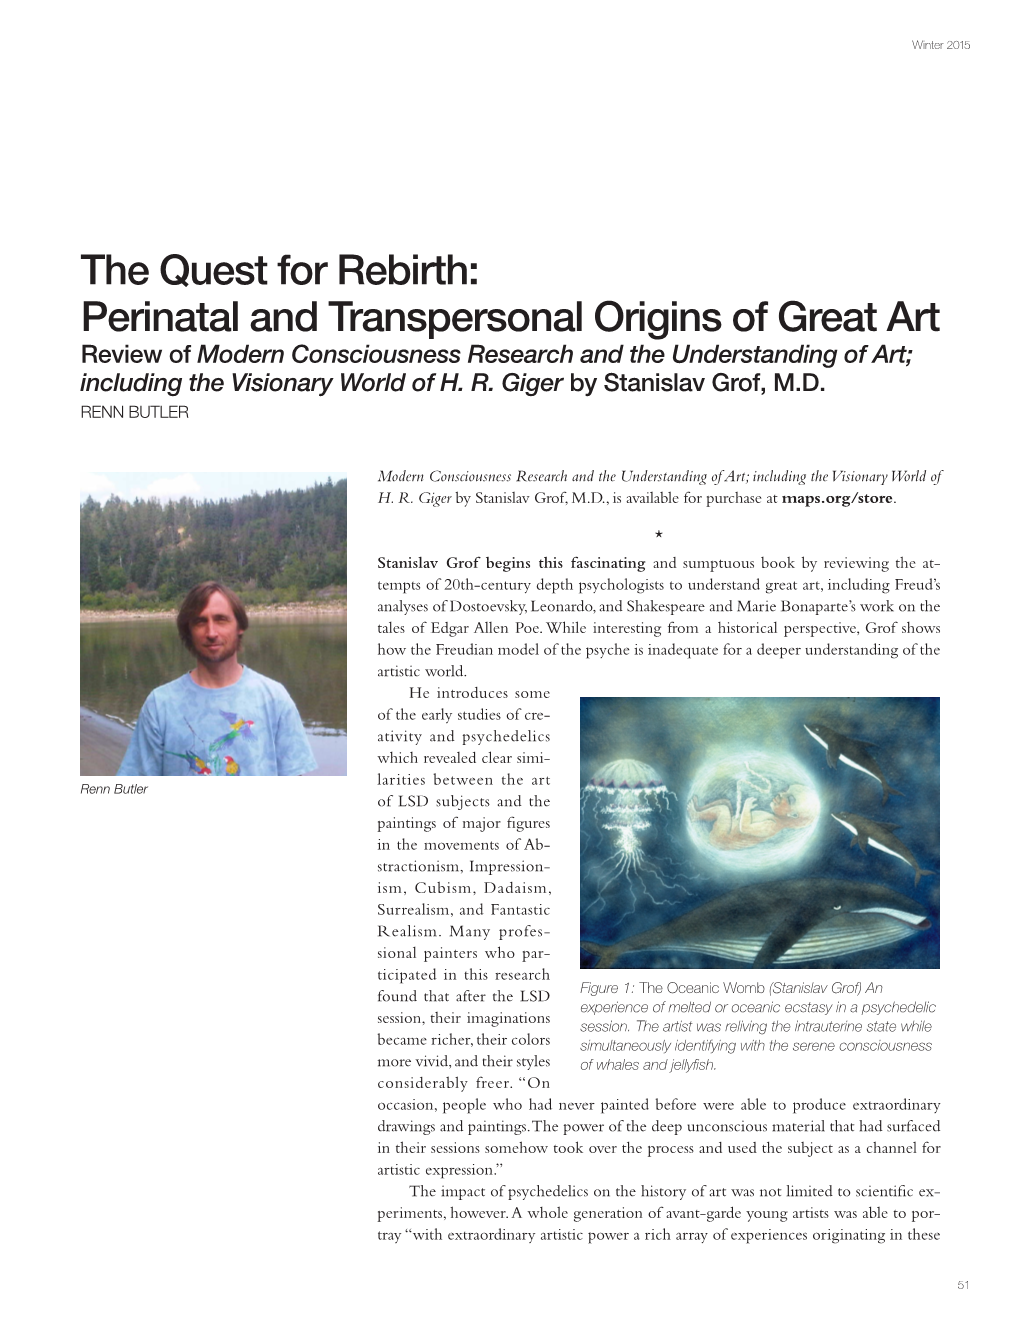 The Quest for Rebirth: Perinatal and Transpersonal Origins of Great